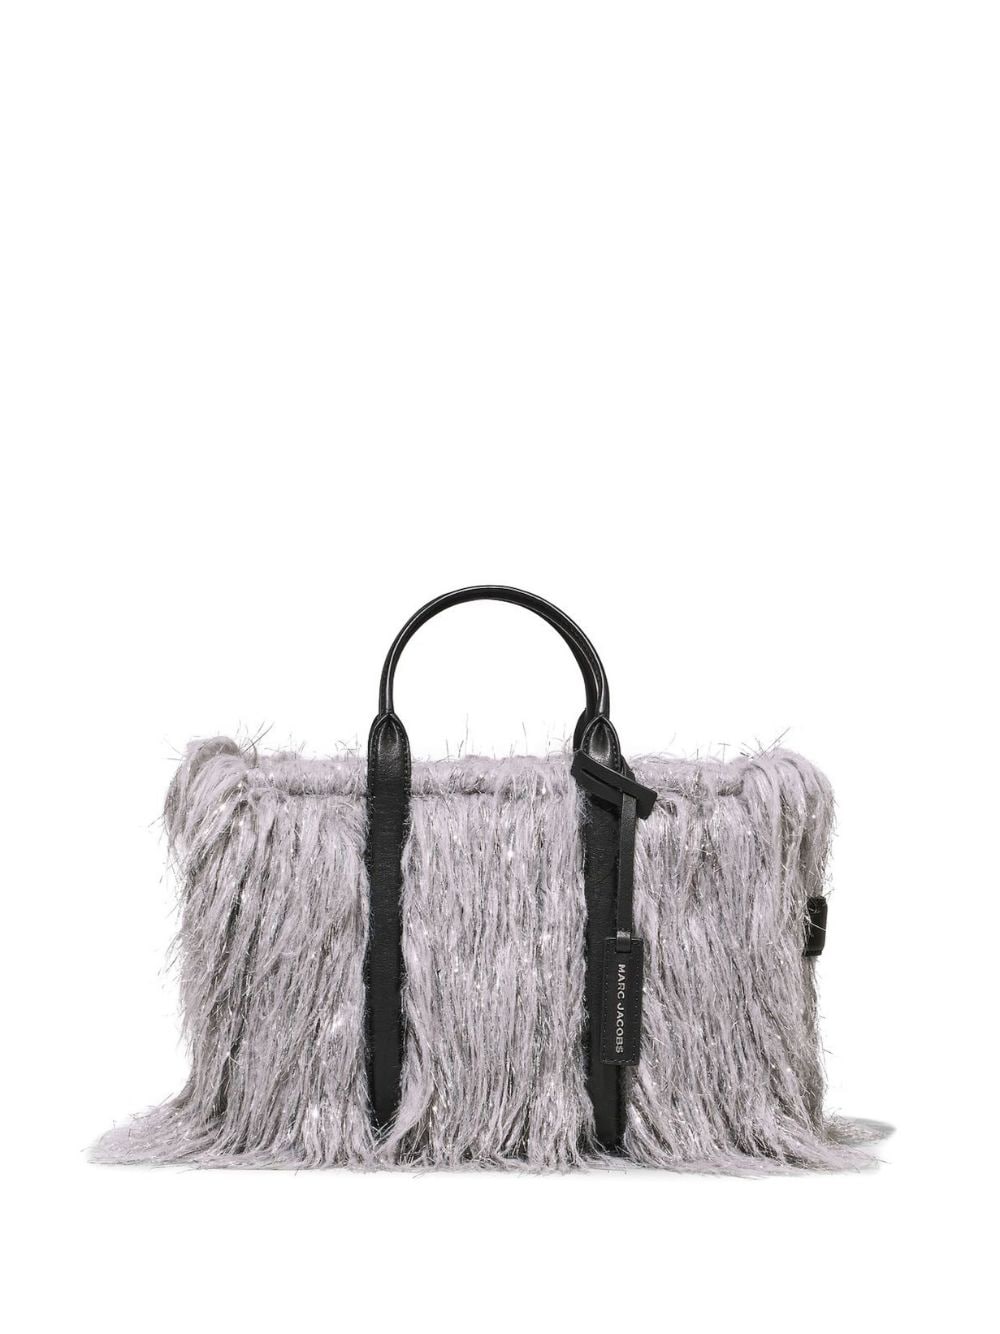 Marc Jacobs The Creature Small Tote bag - Grey von Marc Jacobs